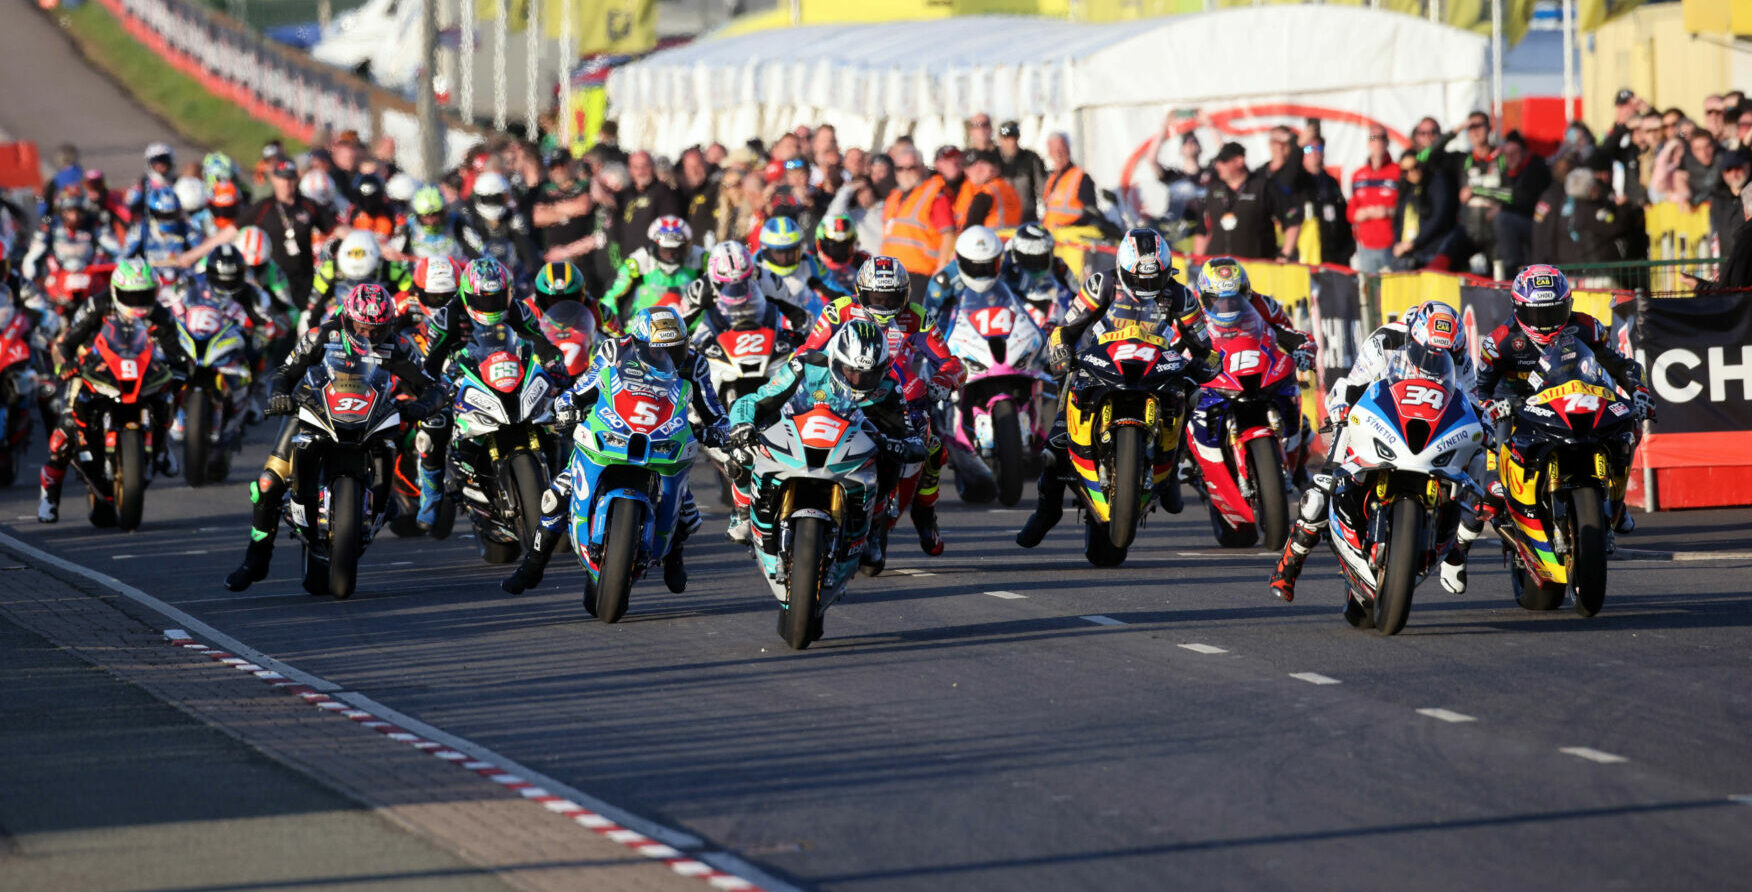 The start of the Superstock race Thursday evening at the North West 200. Alastair Seeley (34), Davey Todd (74), and Michael Dunlop (6) lead the field off the grid. Photo courtesy NW200 Press Office.